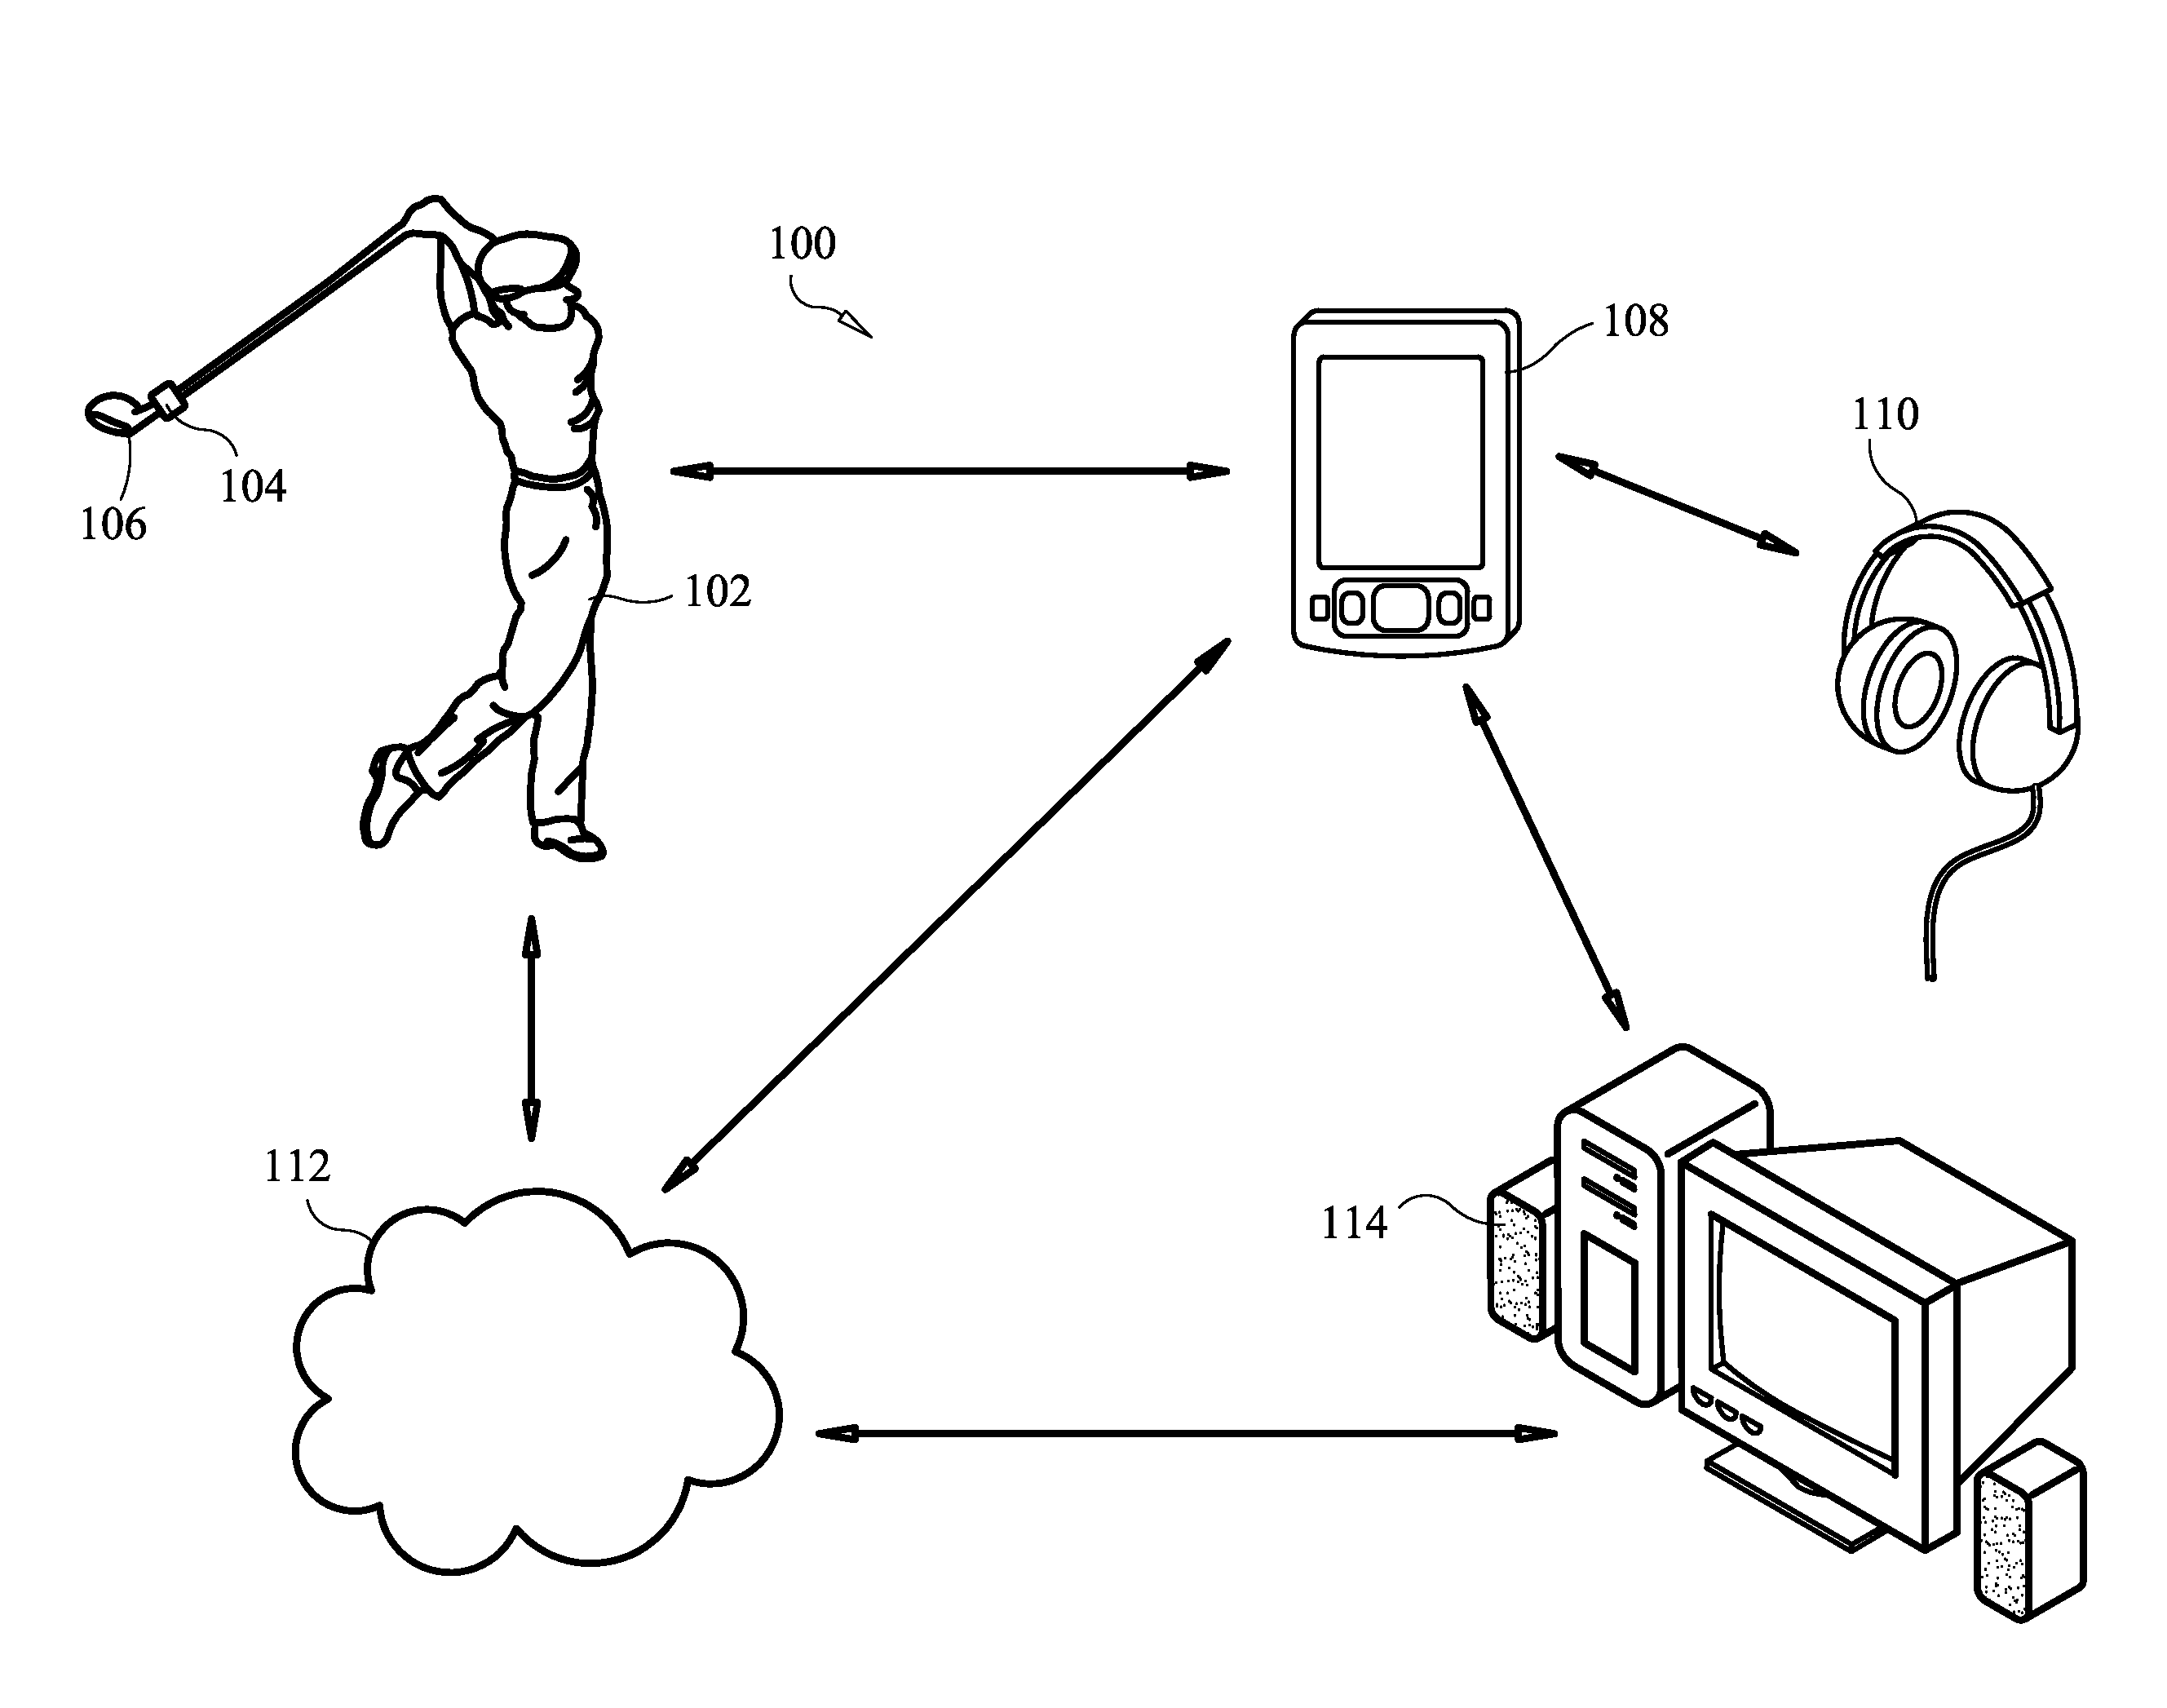 Systems and methods for measuring and/or analyzing swing information